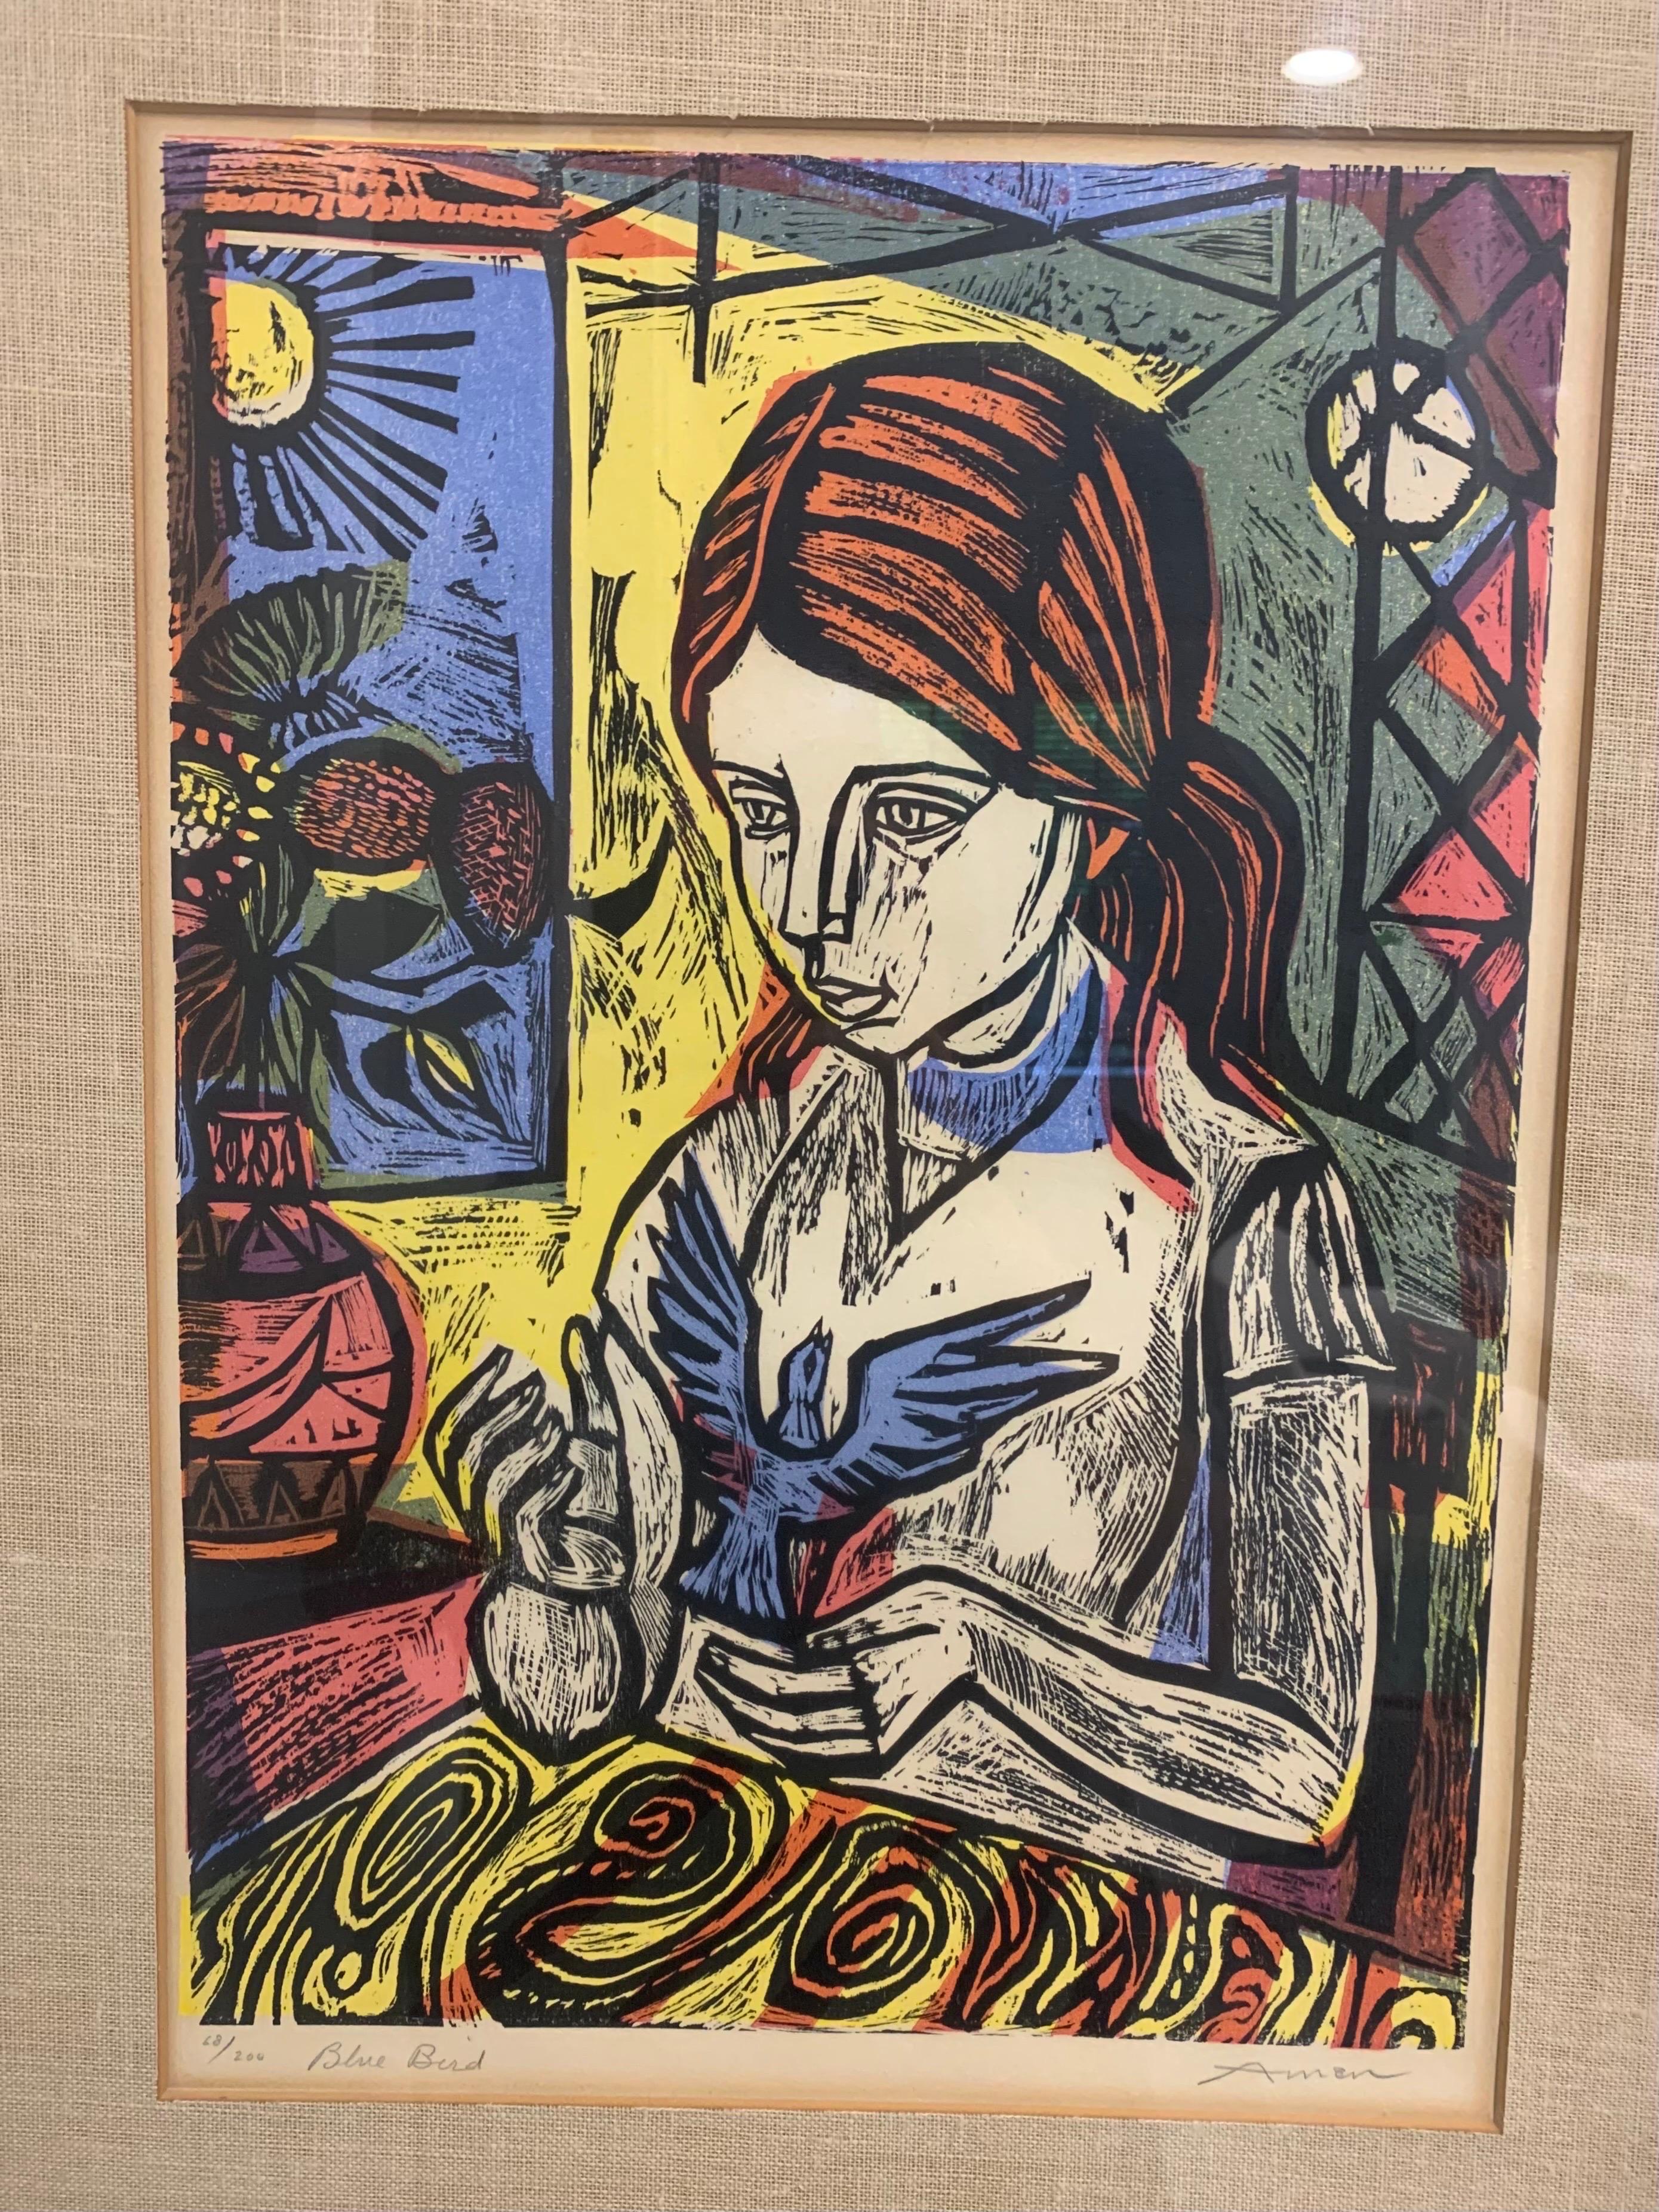 Irving Amen Signed Wood Cut Print Titled “Blue Bird” no. 68/200 For Sale 2